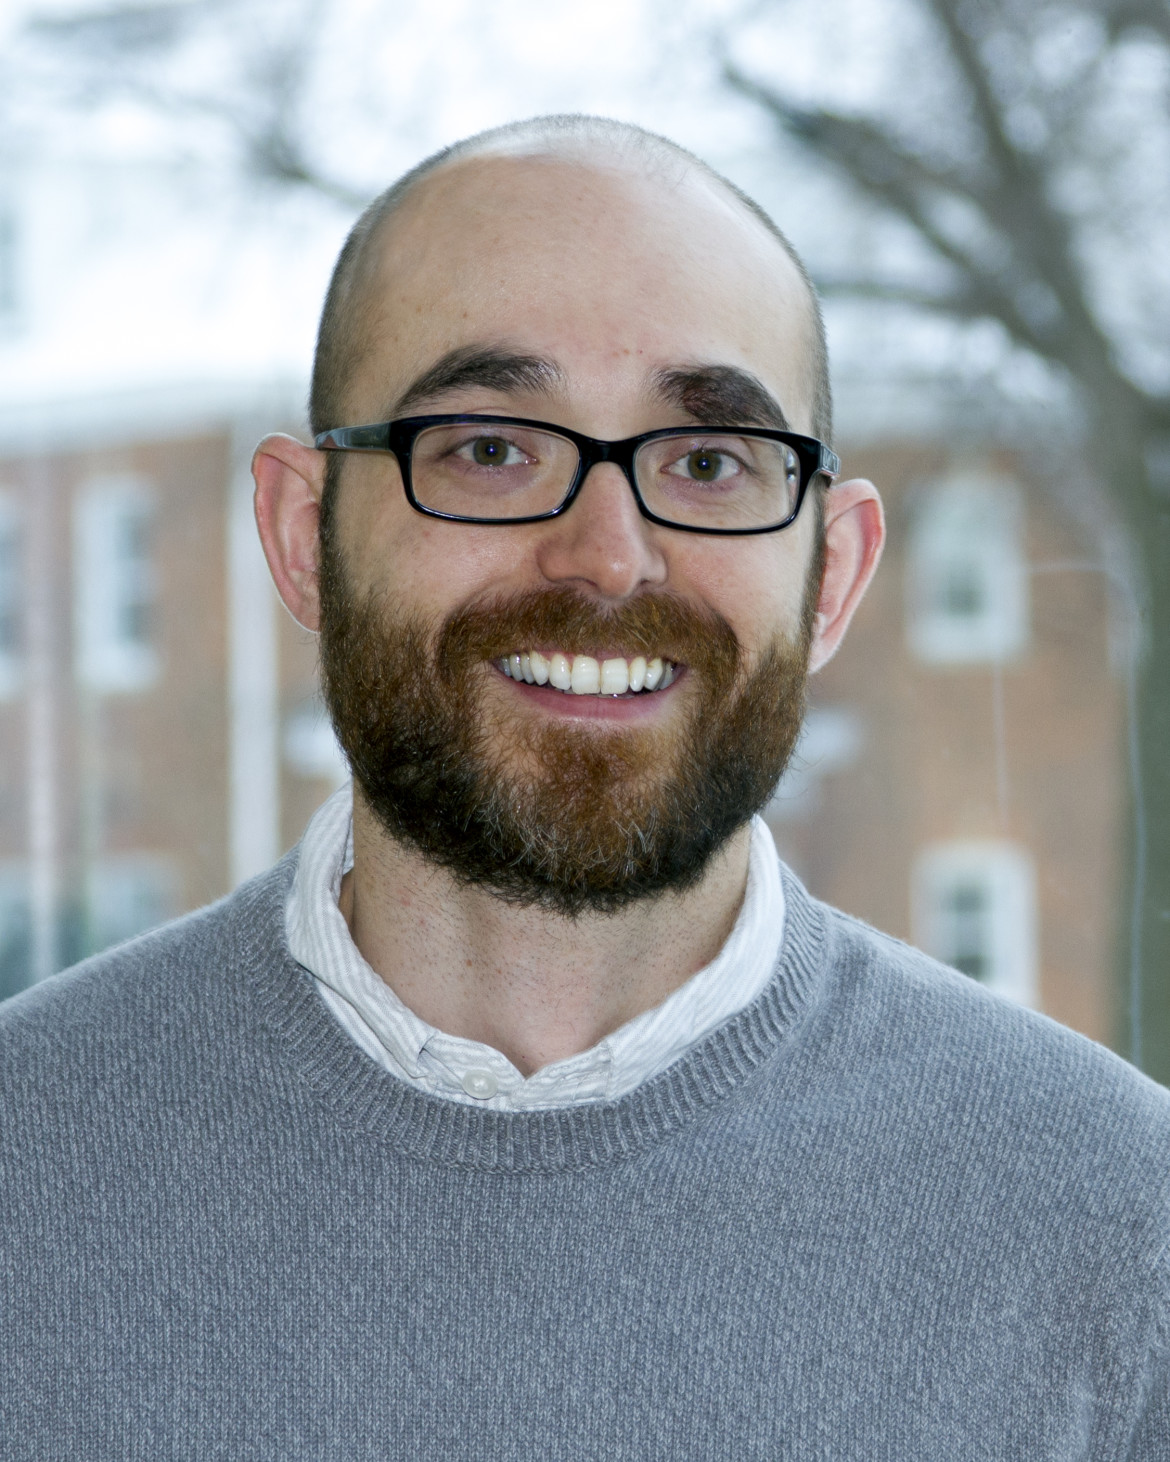 risk assessment: Fredrick Butcher (headshot), research assistant professor at Case Western Reserve University, smiling man with dark beard, mustache, glasses wearing blue sweater over shirt.